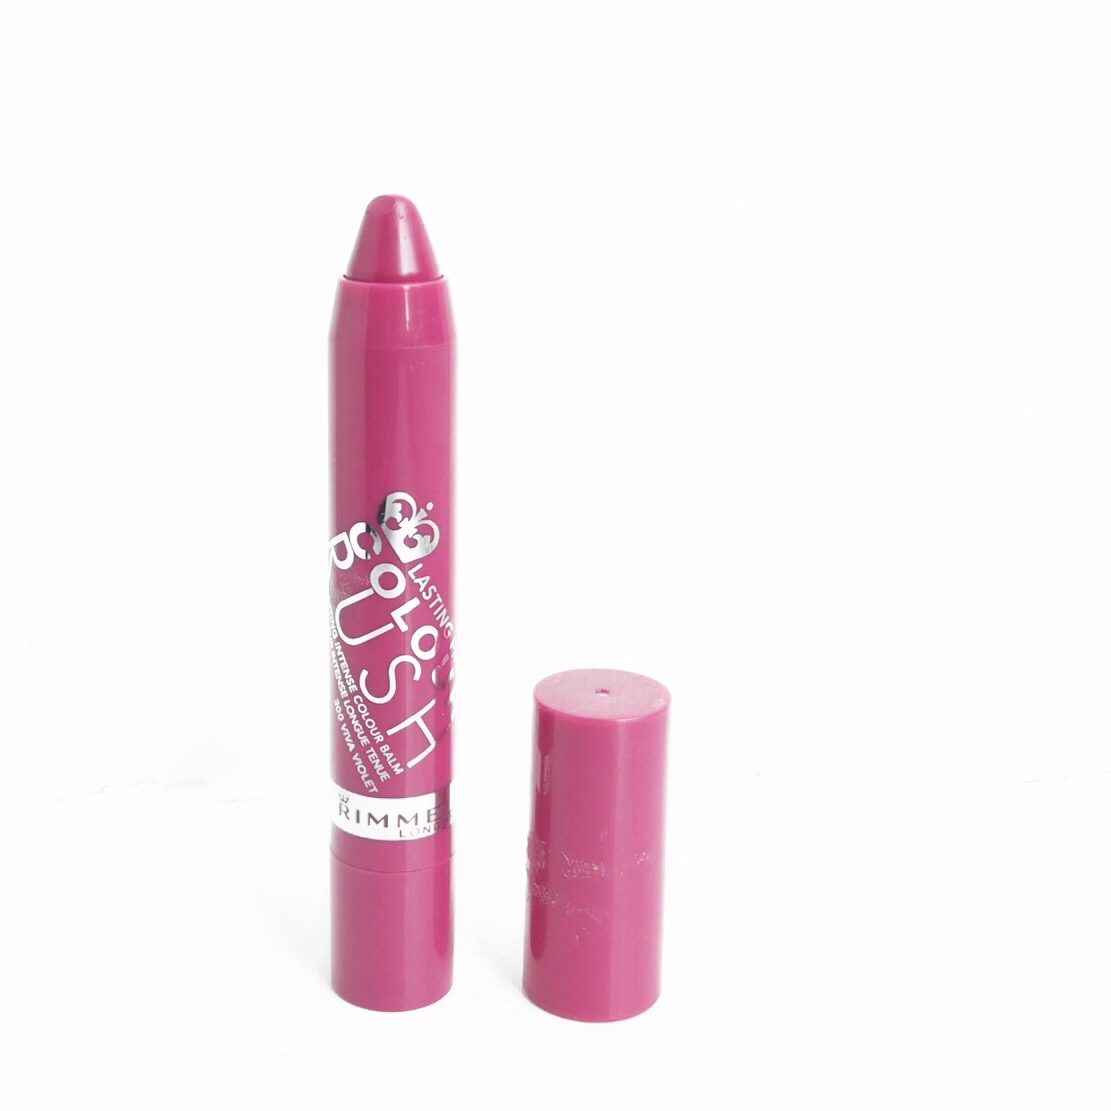 Simply Lippy Challenge Day 134 Rimmel Lasting Finish Colour Rush Balm in Sh...